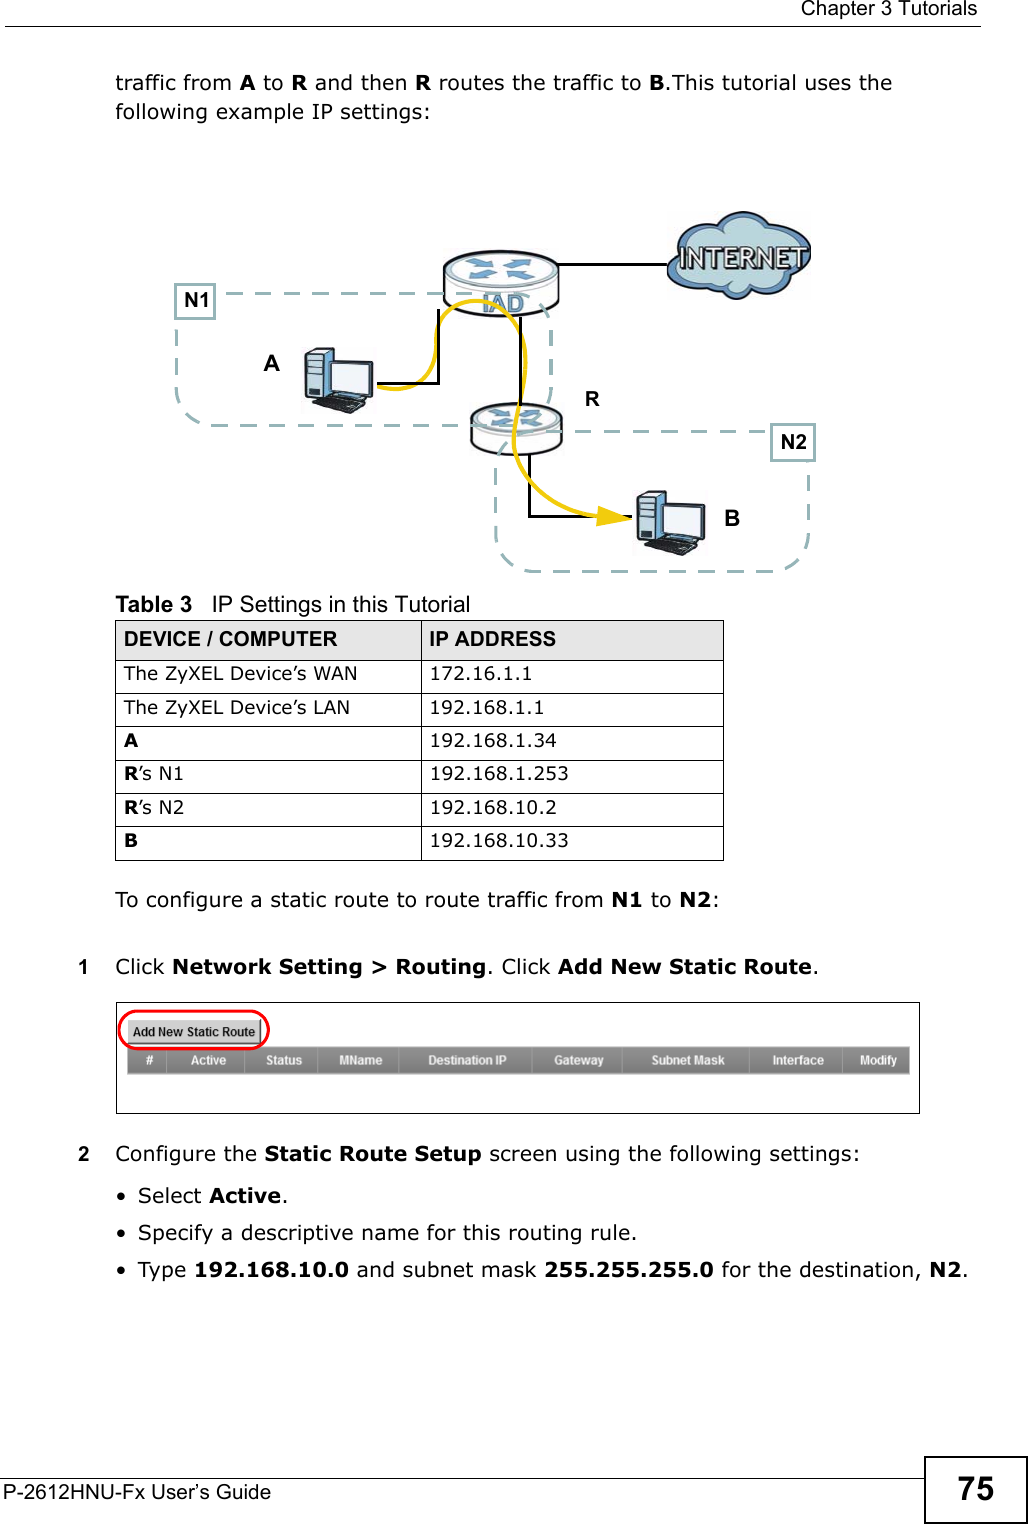  Chapter 3 TutorialsP-2612HNU-Fx User’s Guide 75traffic from A to R and then R routes the traffic to B.This tutorial uses the following example IP settings:To configure a static route to route traffic from N1 to N2:1Click Network Setting &gt; Routing. Click Add New Static Route.2Configure the Static Route Setup screen using the following settings:• Select Active.• Specify a descriptive name for this routing rule.• Type 192.168.10.0 and subnet mask 255.255.255.0 for the destination, N2.Table 3   IP Settings in this TutorialDEVICE / COMPUTER IP ADDRESSThe ZyXEL Device’s WAN 172.16.1.1The ZyXEL Device’s LAN 192.168.1.1A192.168.1.34R’s N1  192.168.1.253R’s N2  192.168.10.2B192.168.10.33N2BN1AR